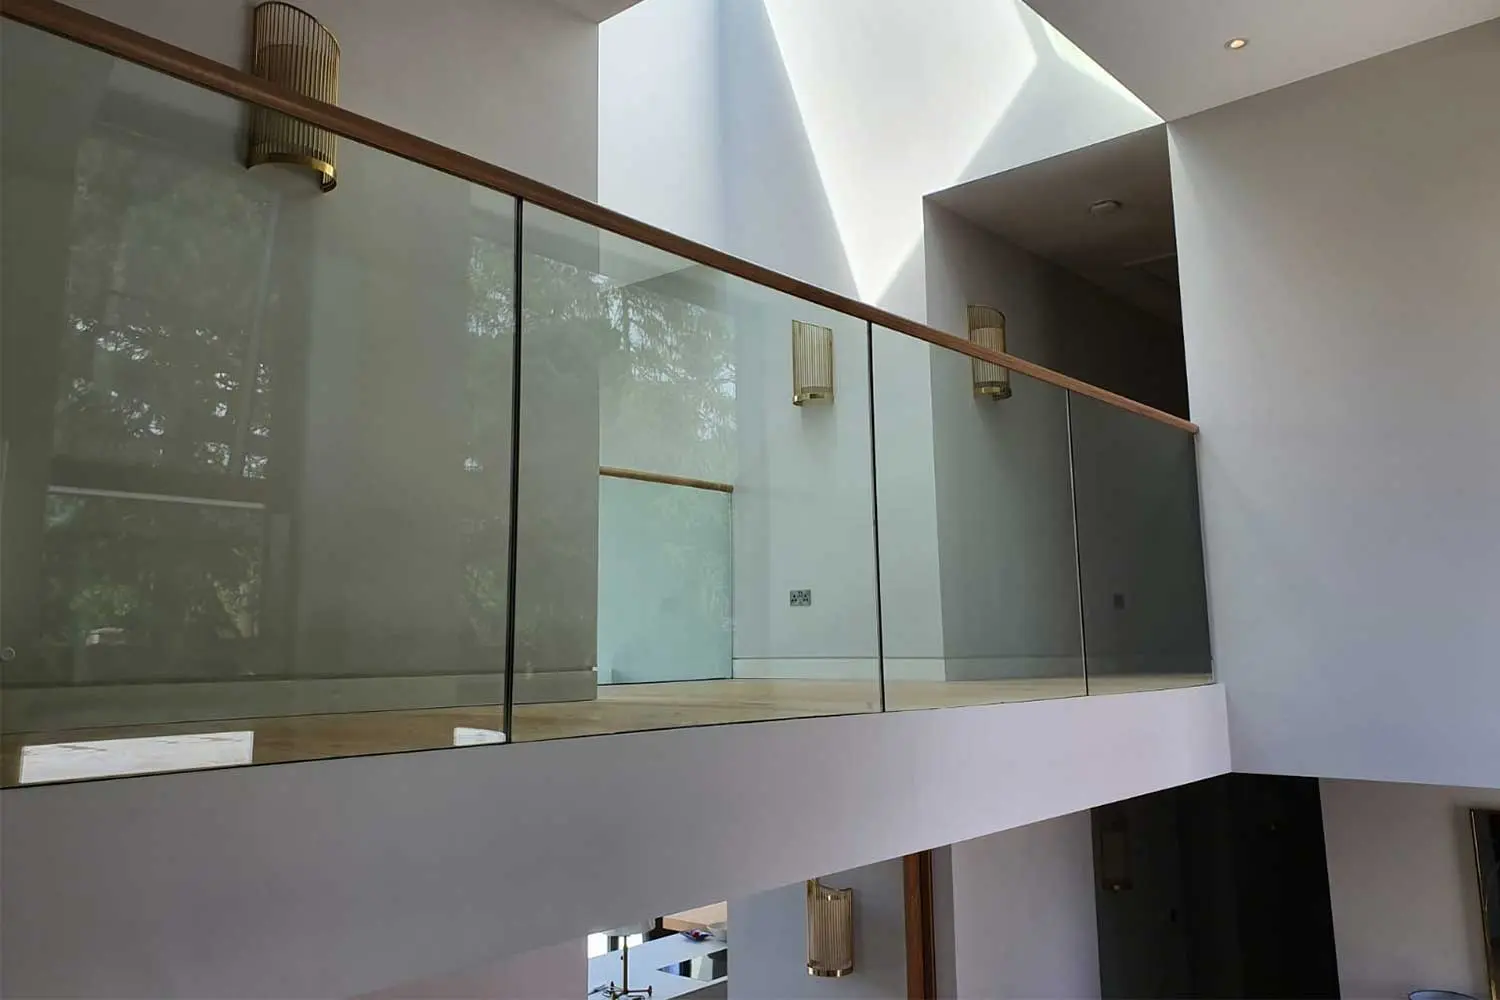 OMC Technologies - Glenlion Feature Staircase & Balustrade